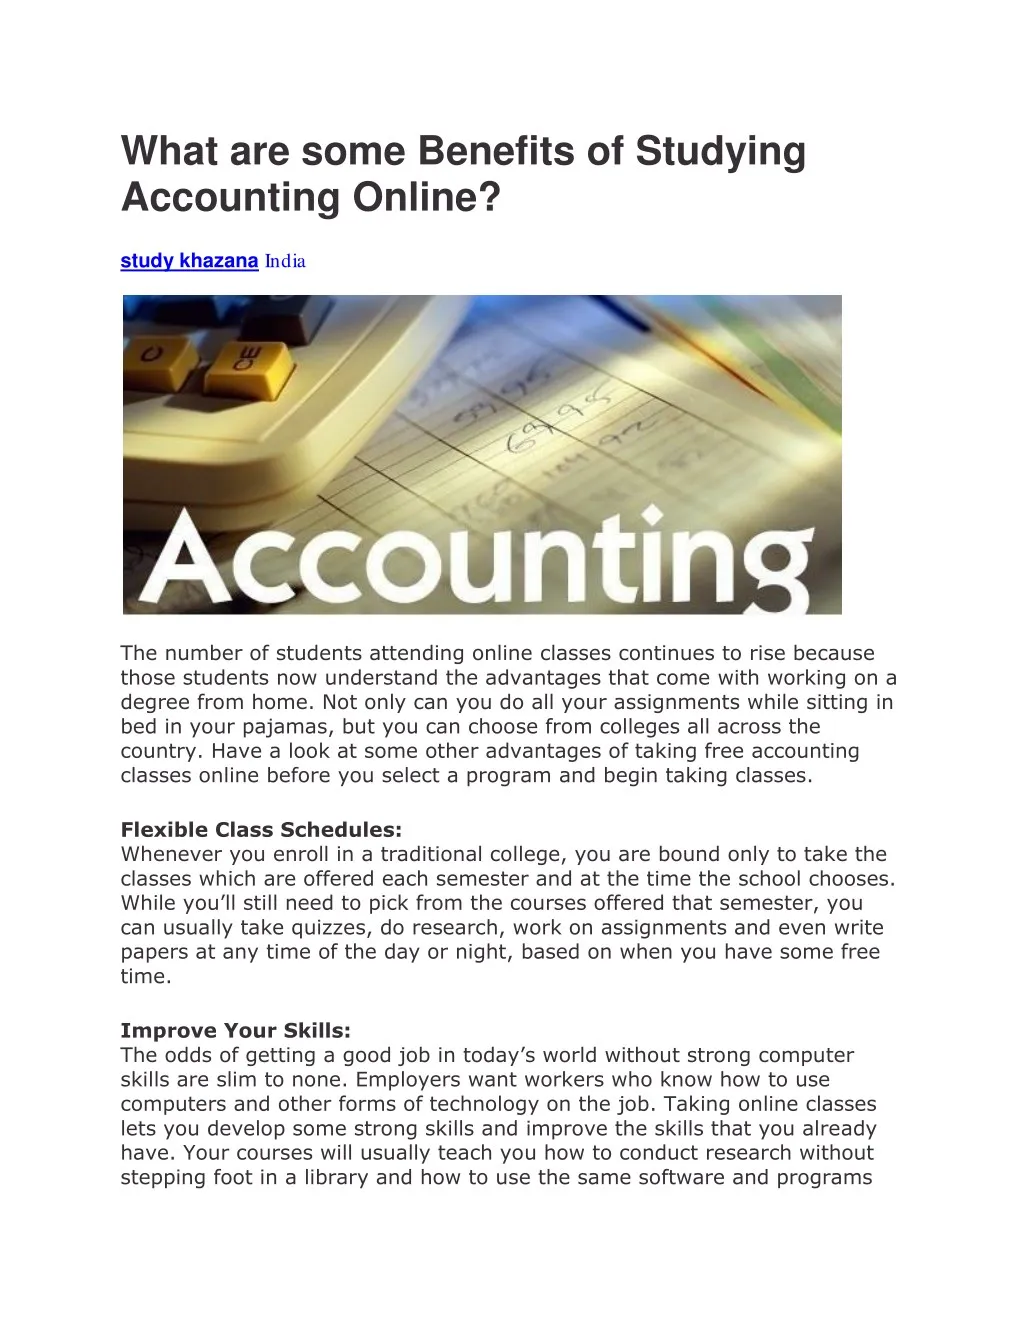 what are some benefits of studying accounting